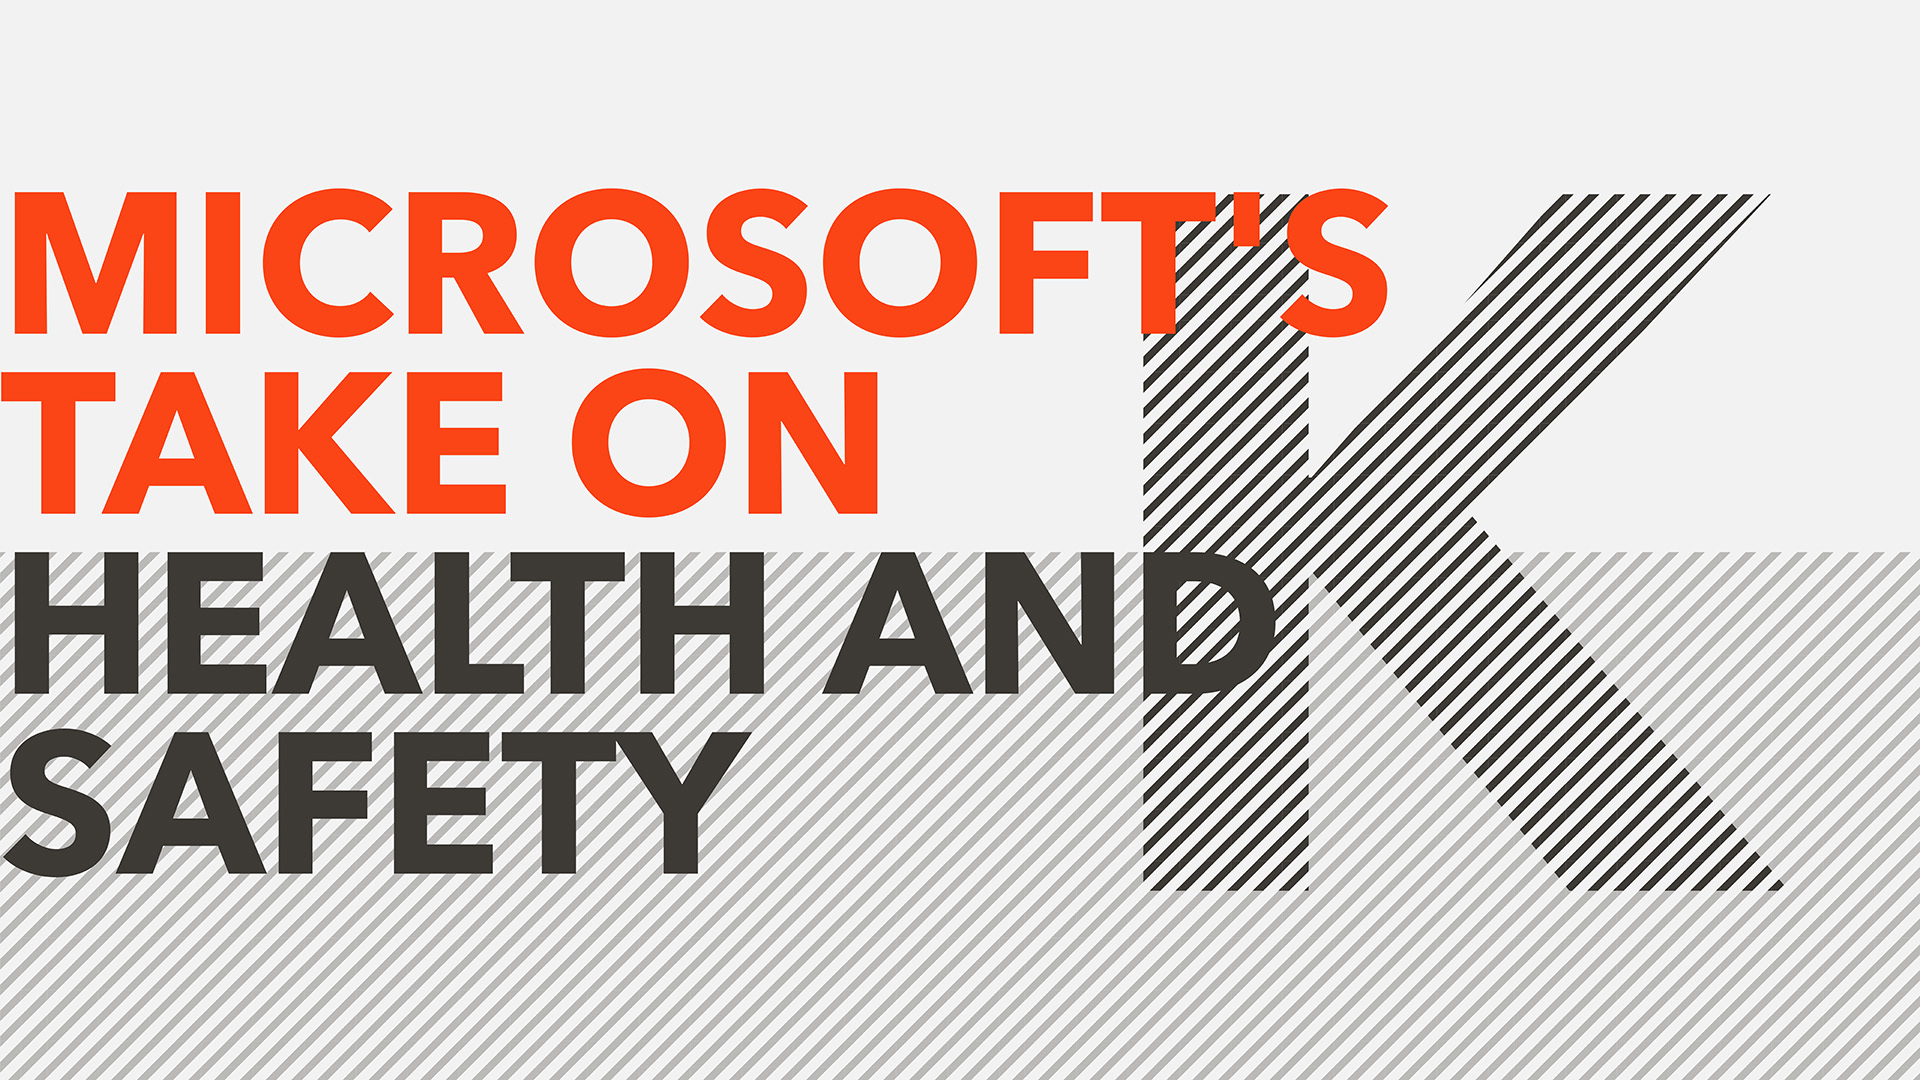 Microsoft’s take on health and safety